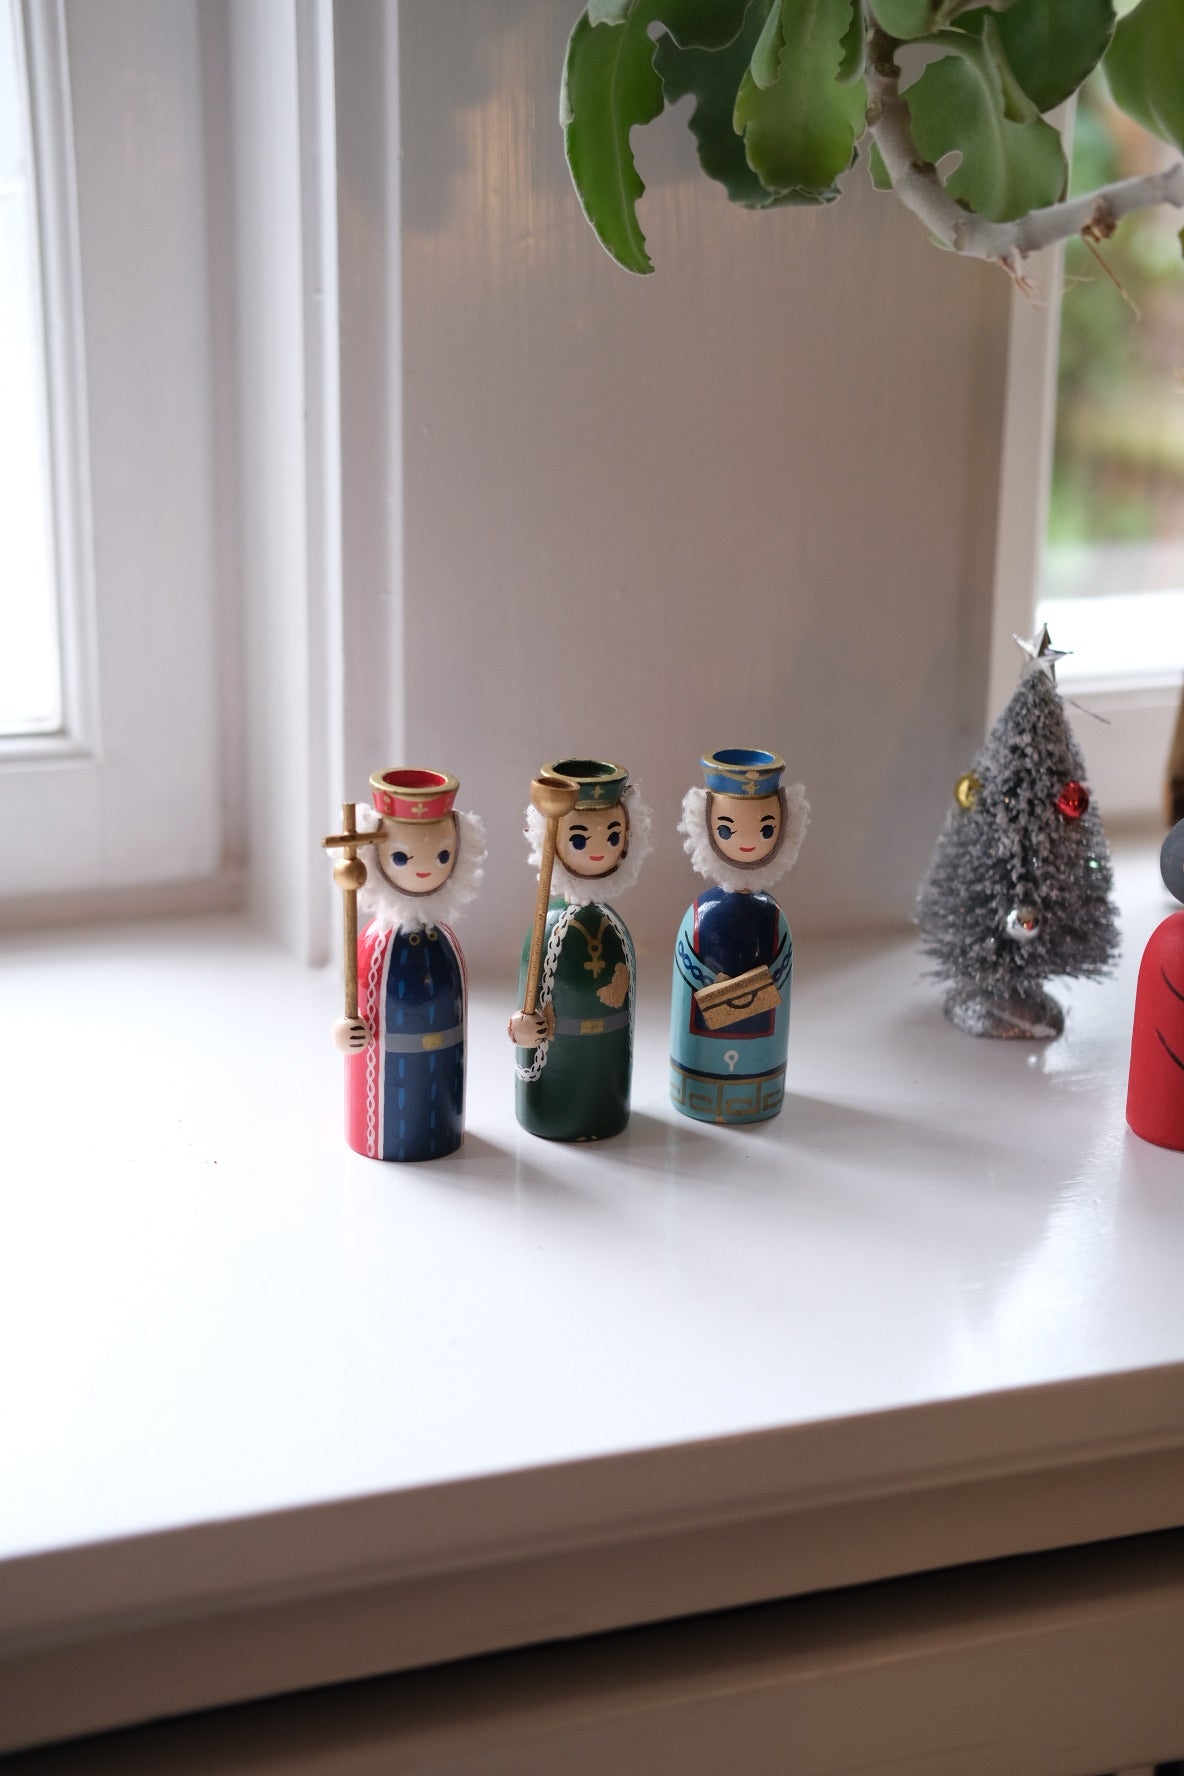 Christmas decorations • The Holy Three Kings